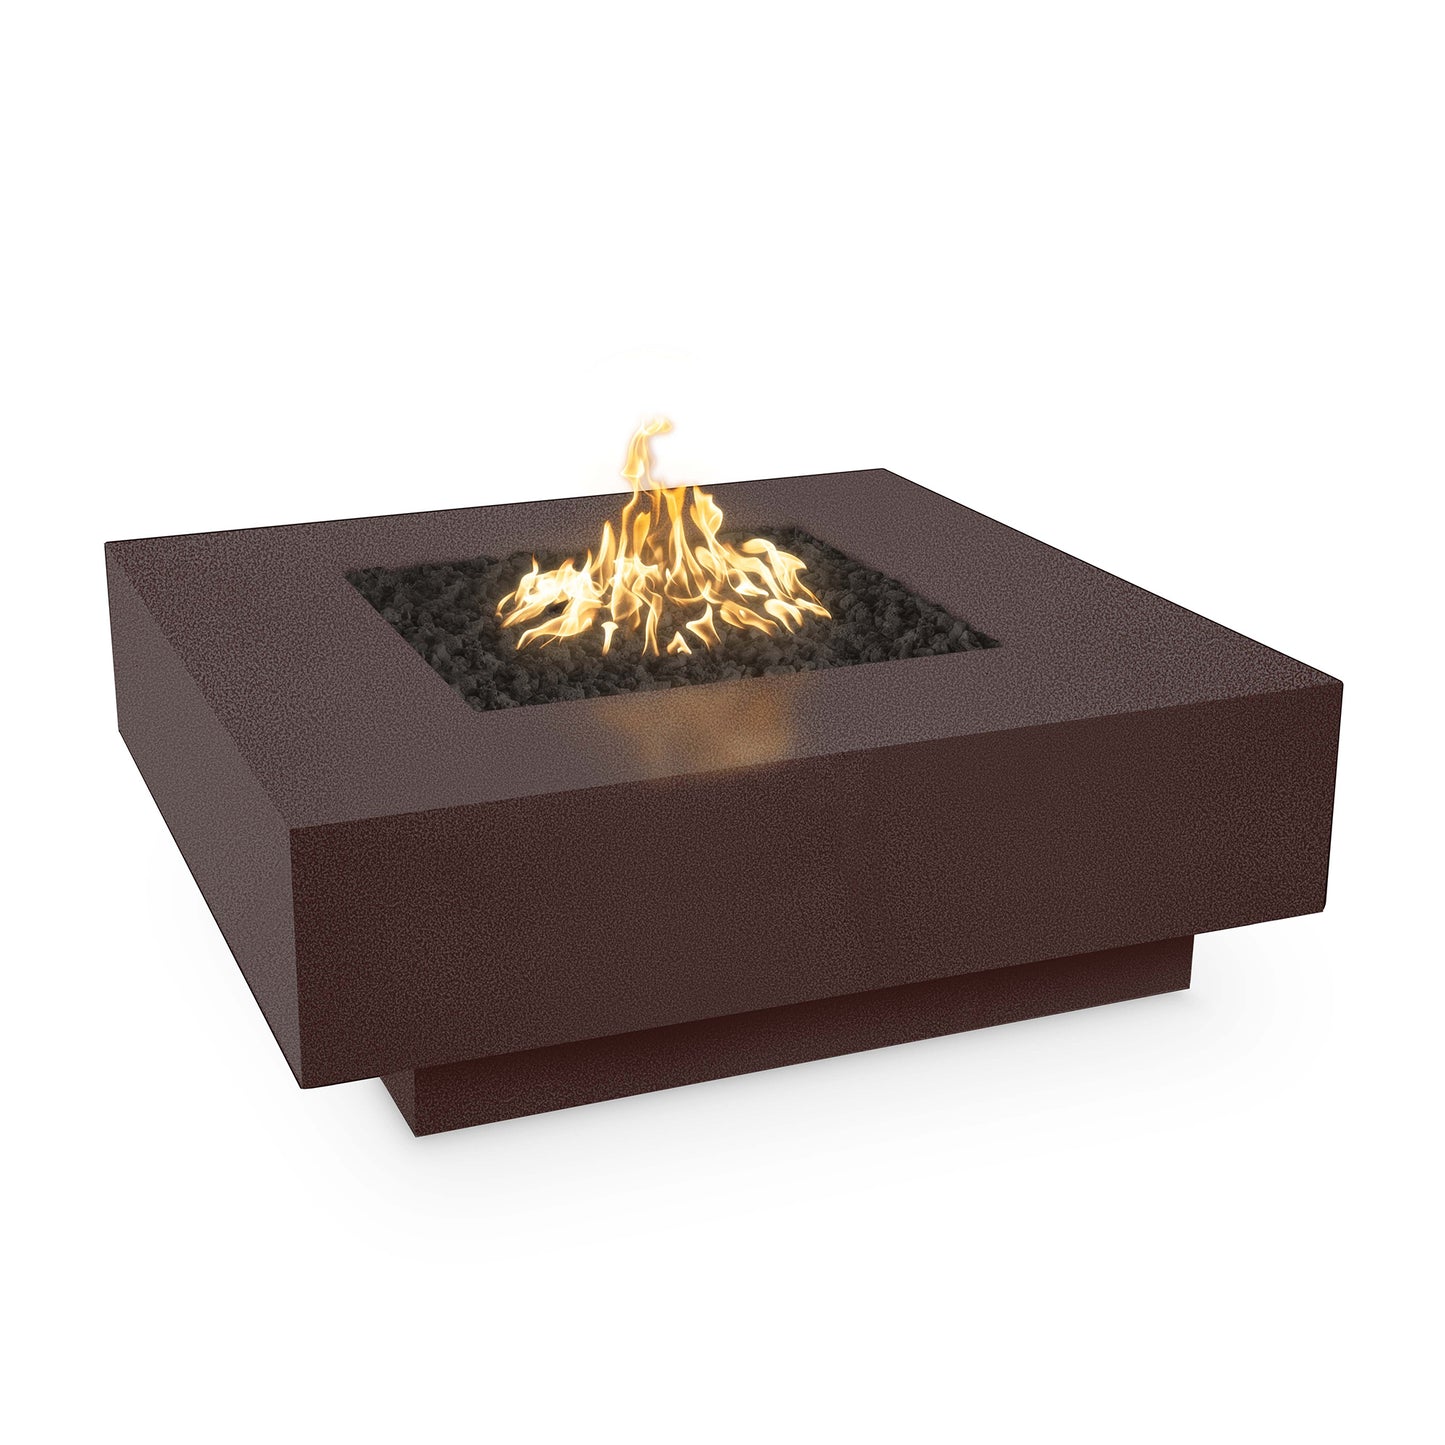 Cabo Square Metal Fire Pit 48" - Electronic Ignition